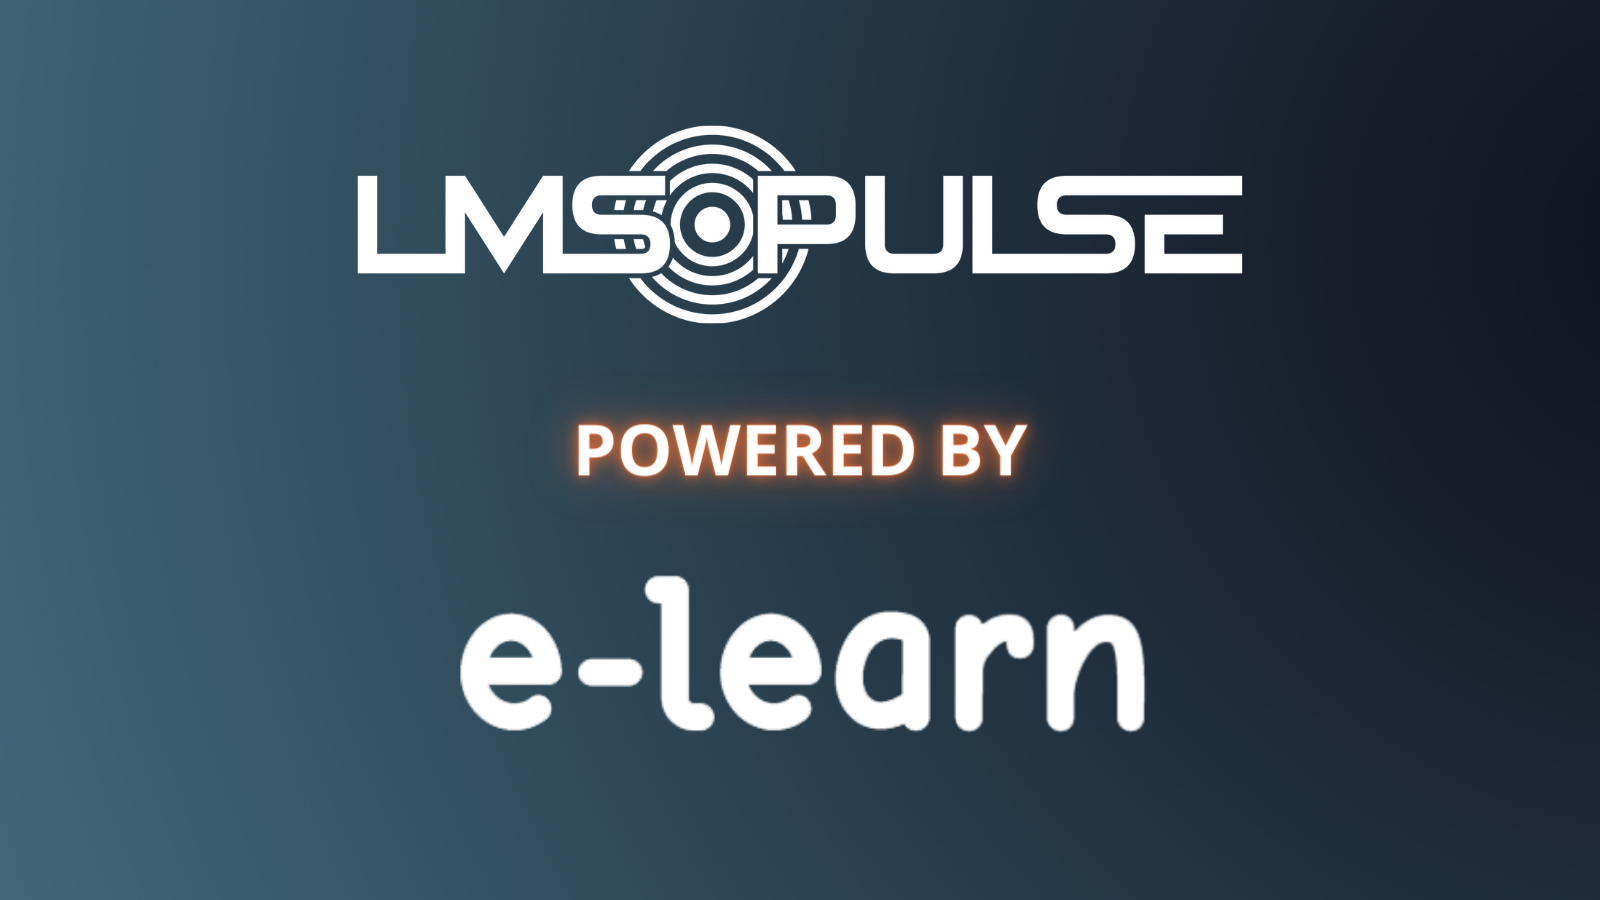 LMSPulse is merging with E-Learn Magazine to create a powerhouse resource for the eLearning community.